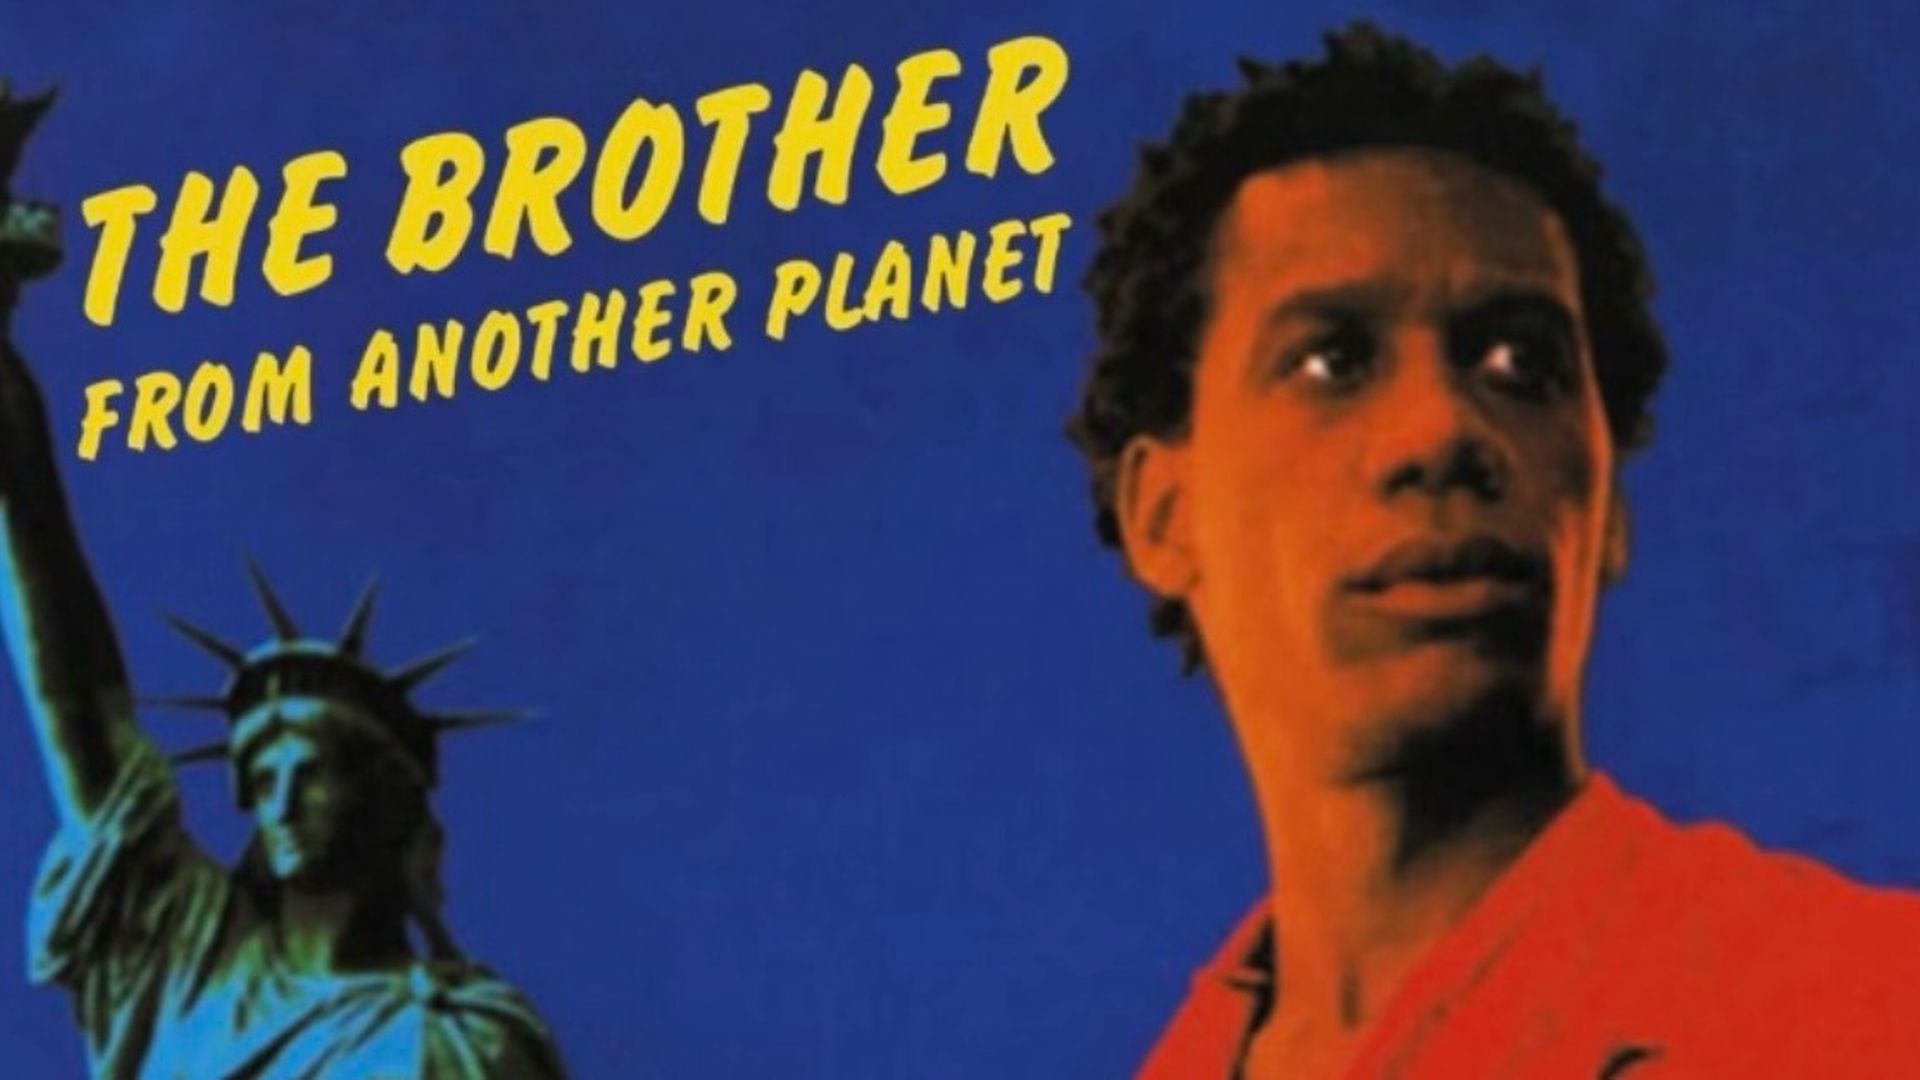 THE BROTHER FROM ANOTHER PLANET TRAILER 